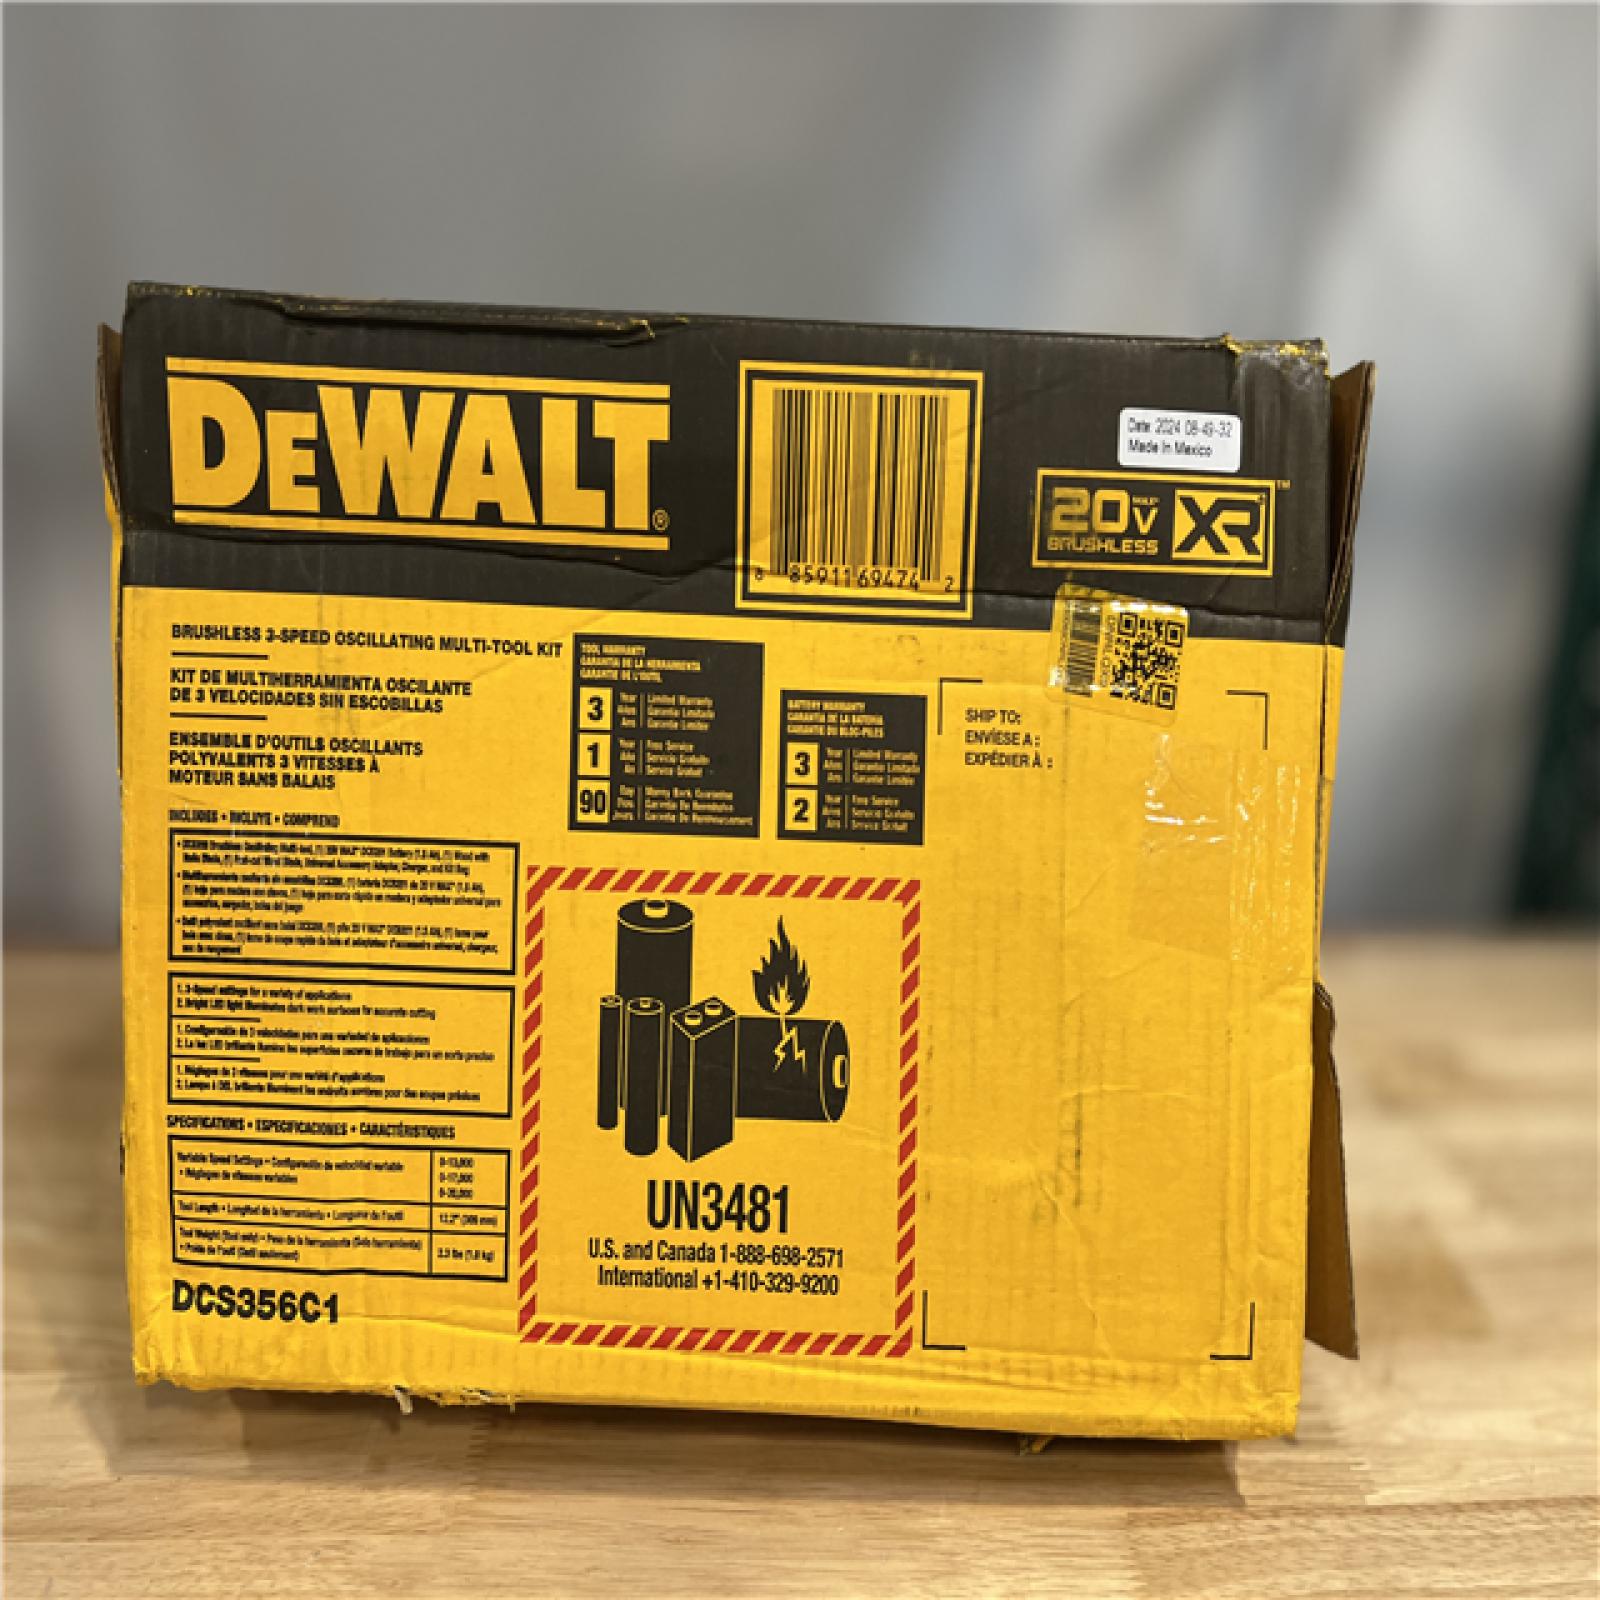 NEW! - DEWALT 20V MAX XR Cordless Brushless 3-Speed Oscillating Multi Tool with (1) 20V 1.5Ah Battery and Charger